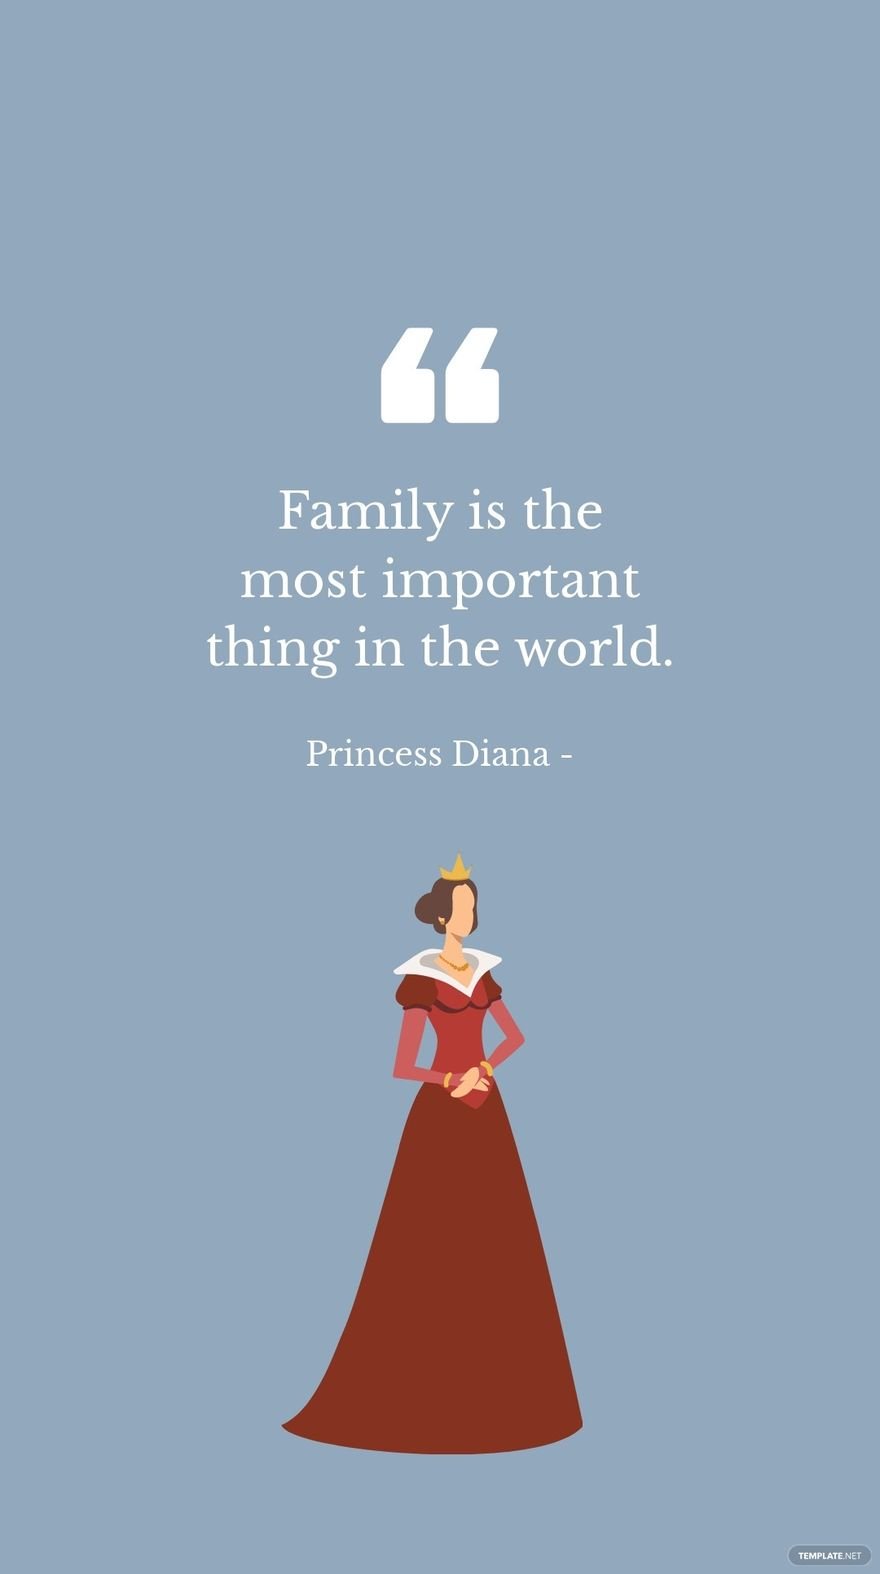 Princess Diana - Family is the most important thing in the world.